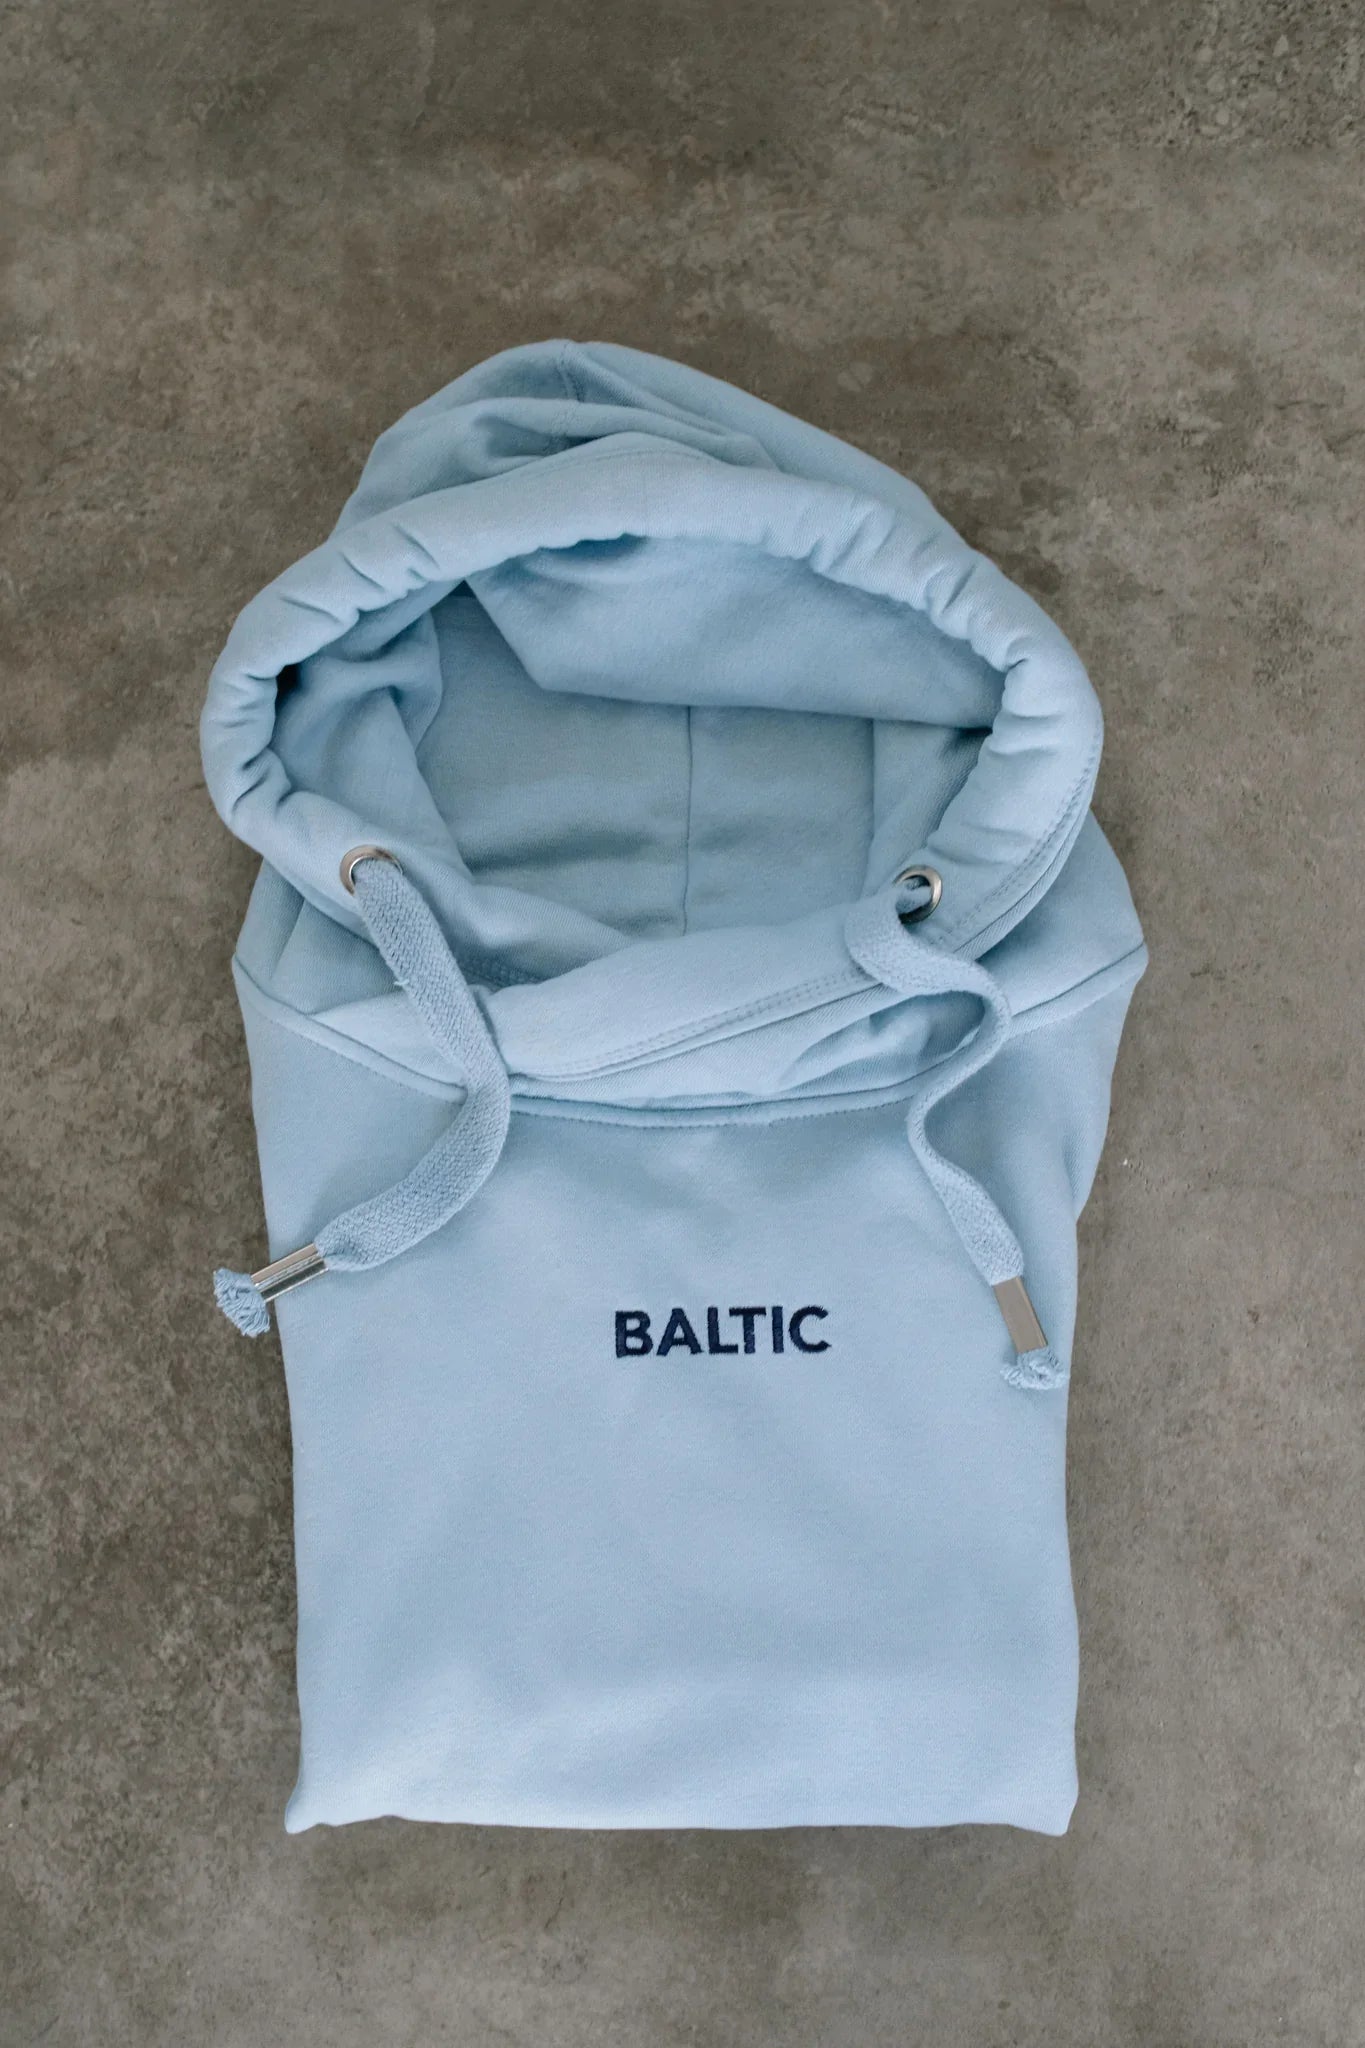 SAMPLE SALE Embroidered 'Baltic' Crossneck hoodie, Baby Blue with Navy Stitching SIZES M L XXL